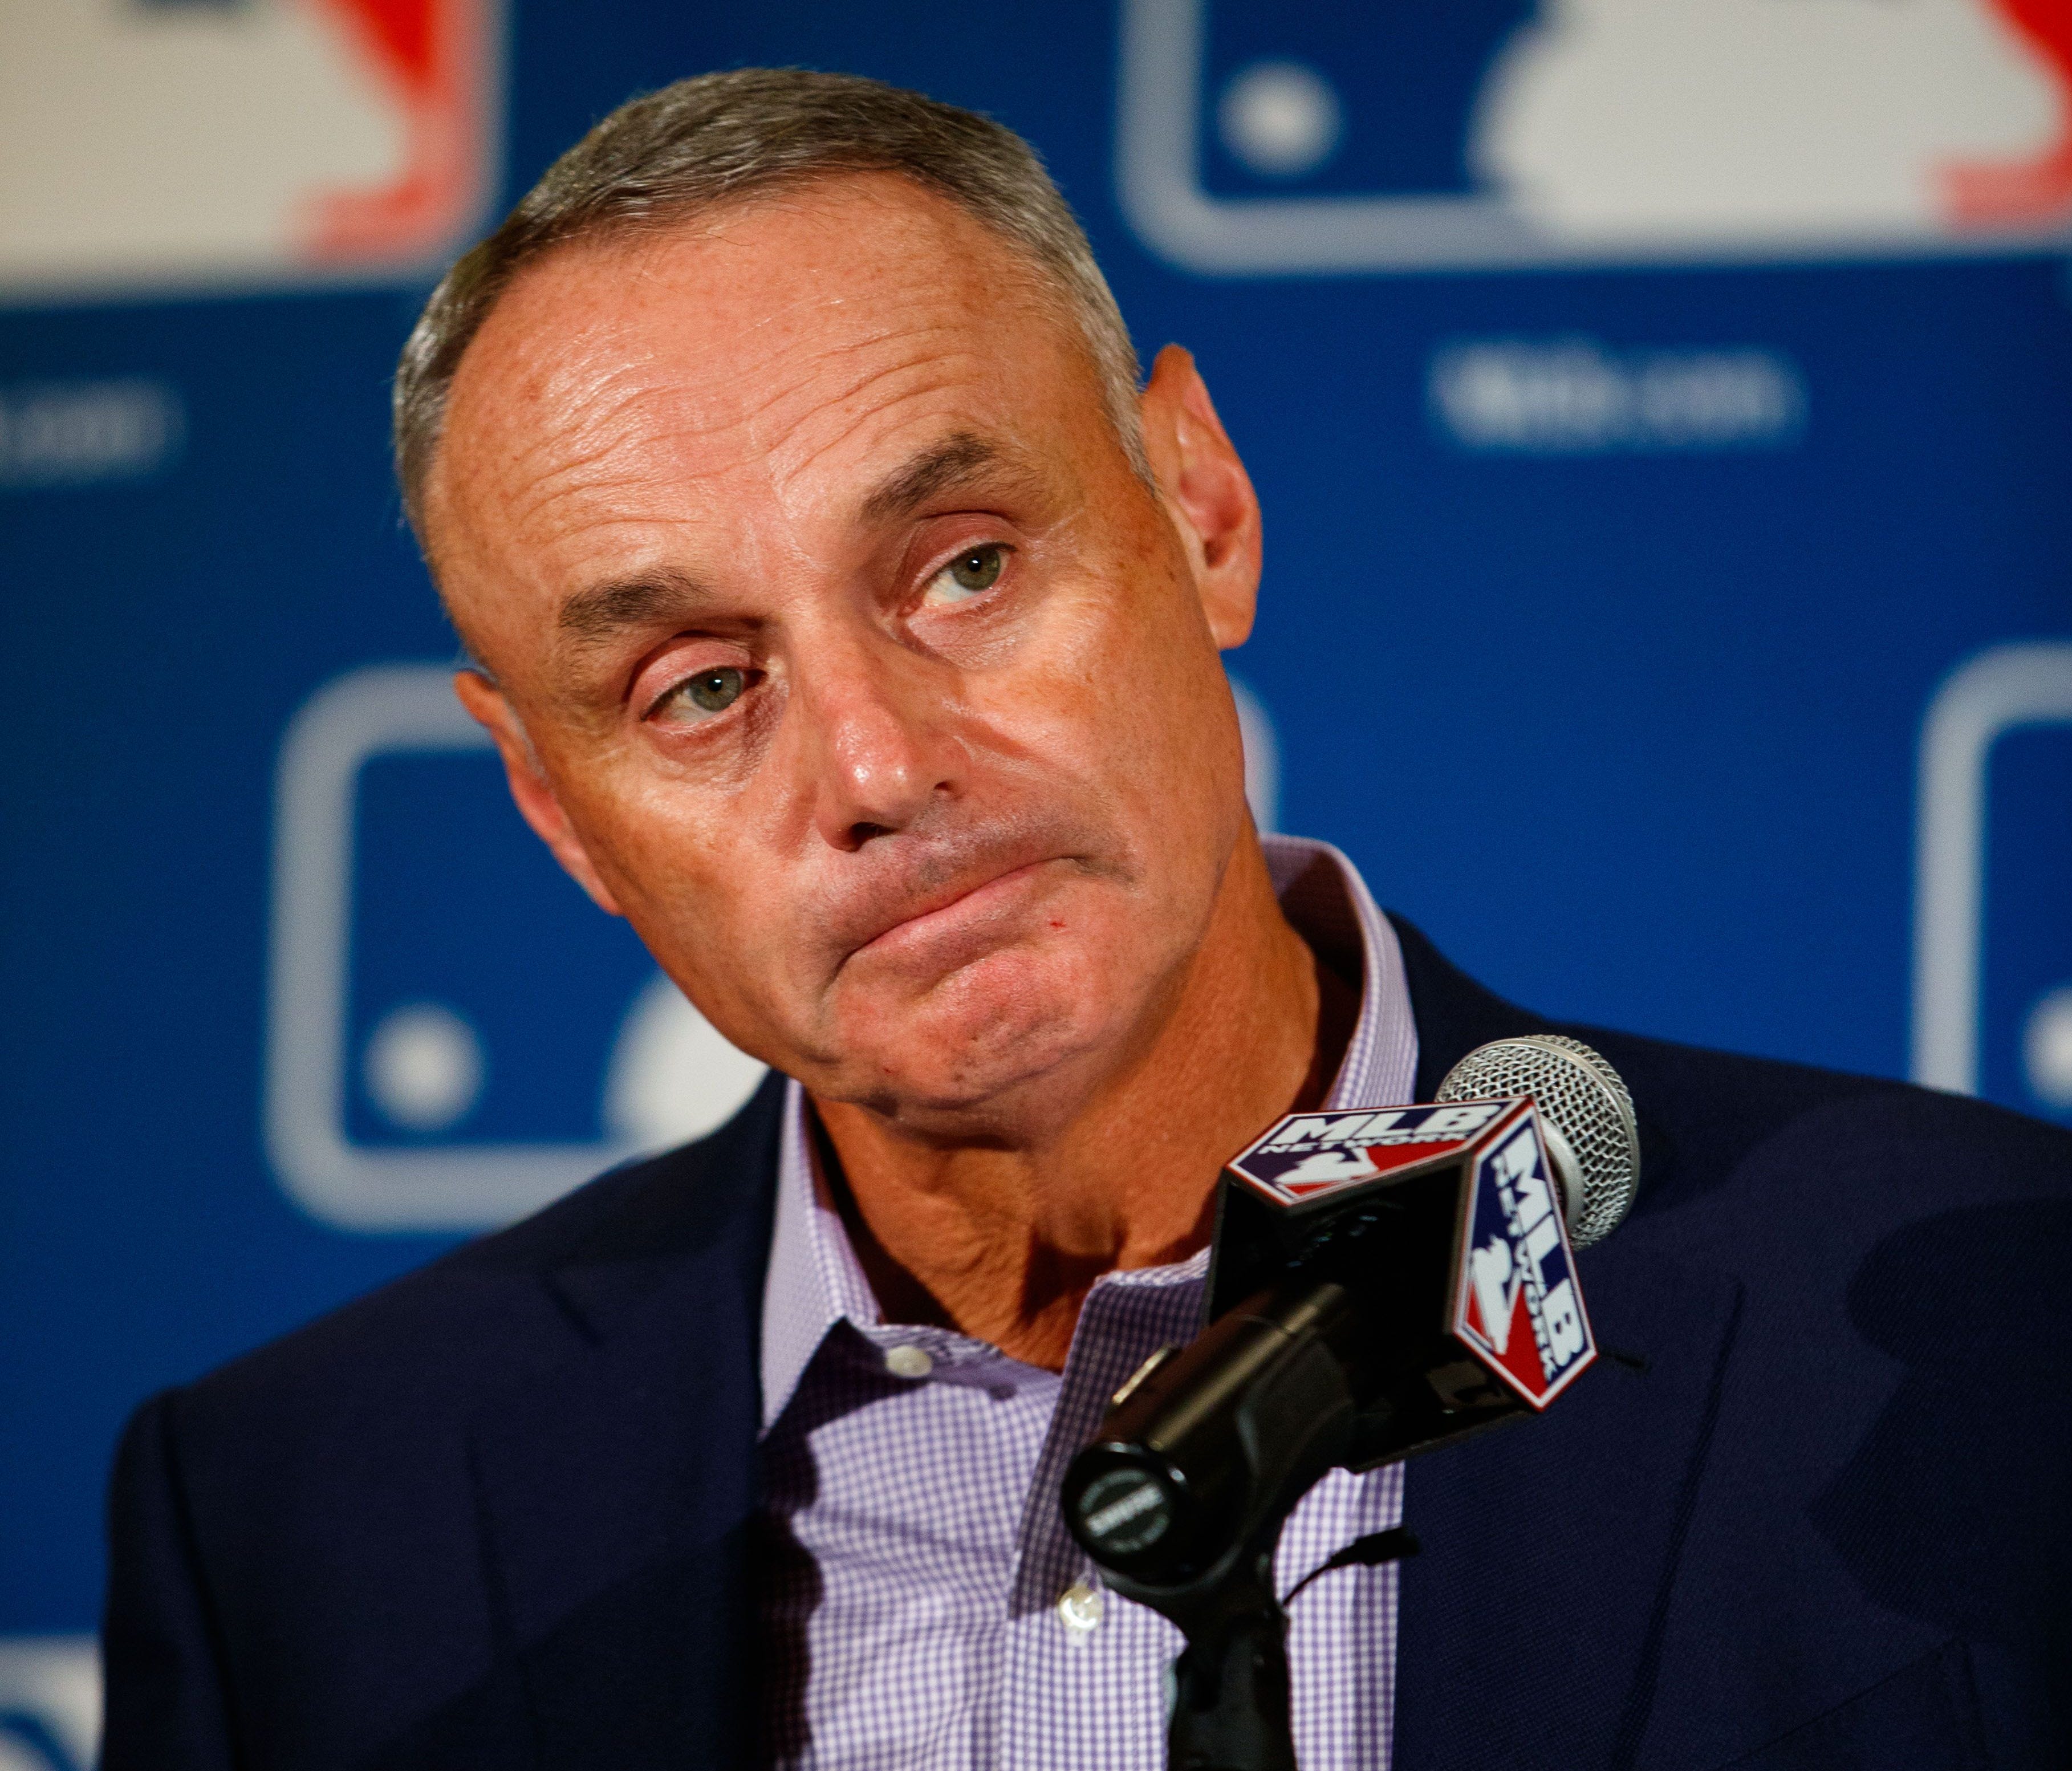 Major League Baseball commissioner Rob Manfred speaks during Spring Training Media Day at The Arizona Biltmore.